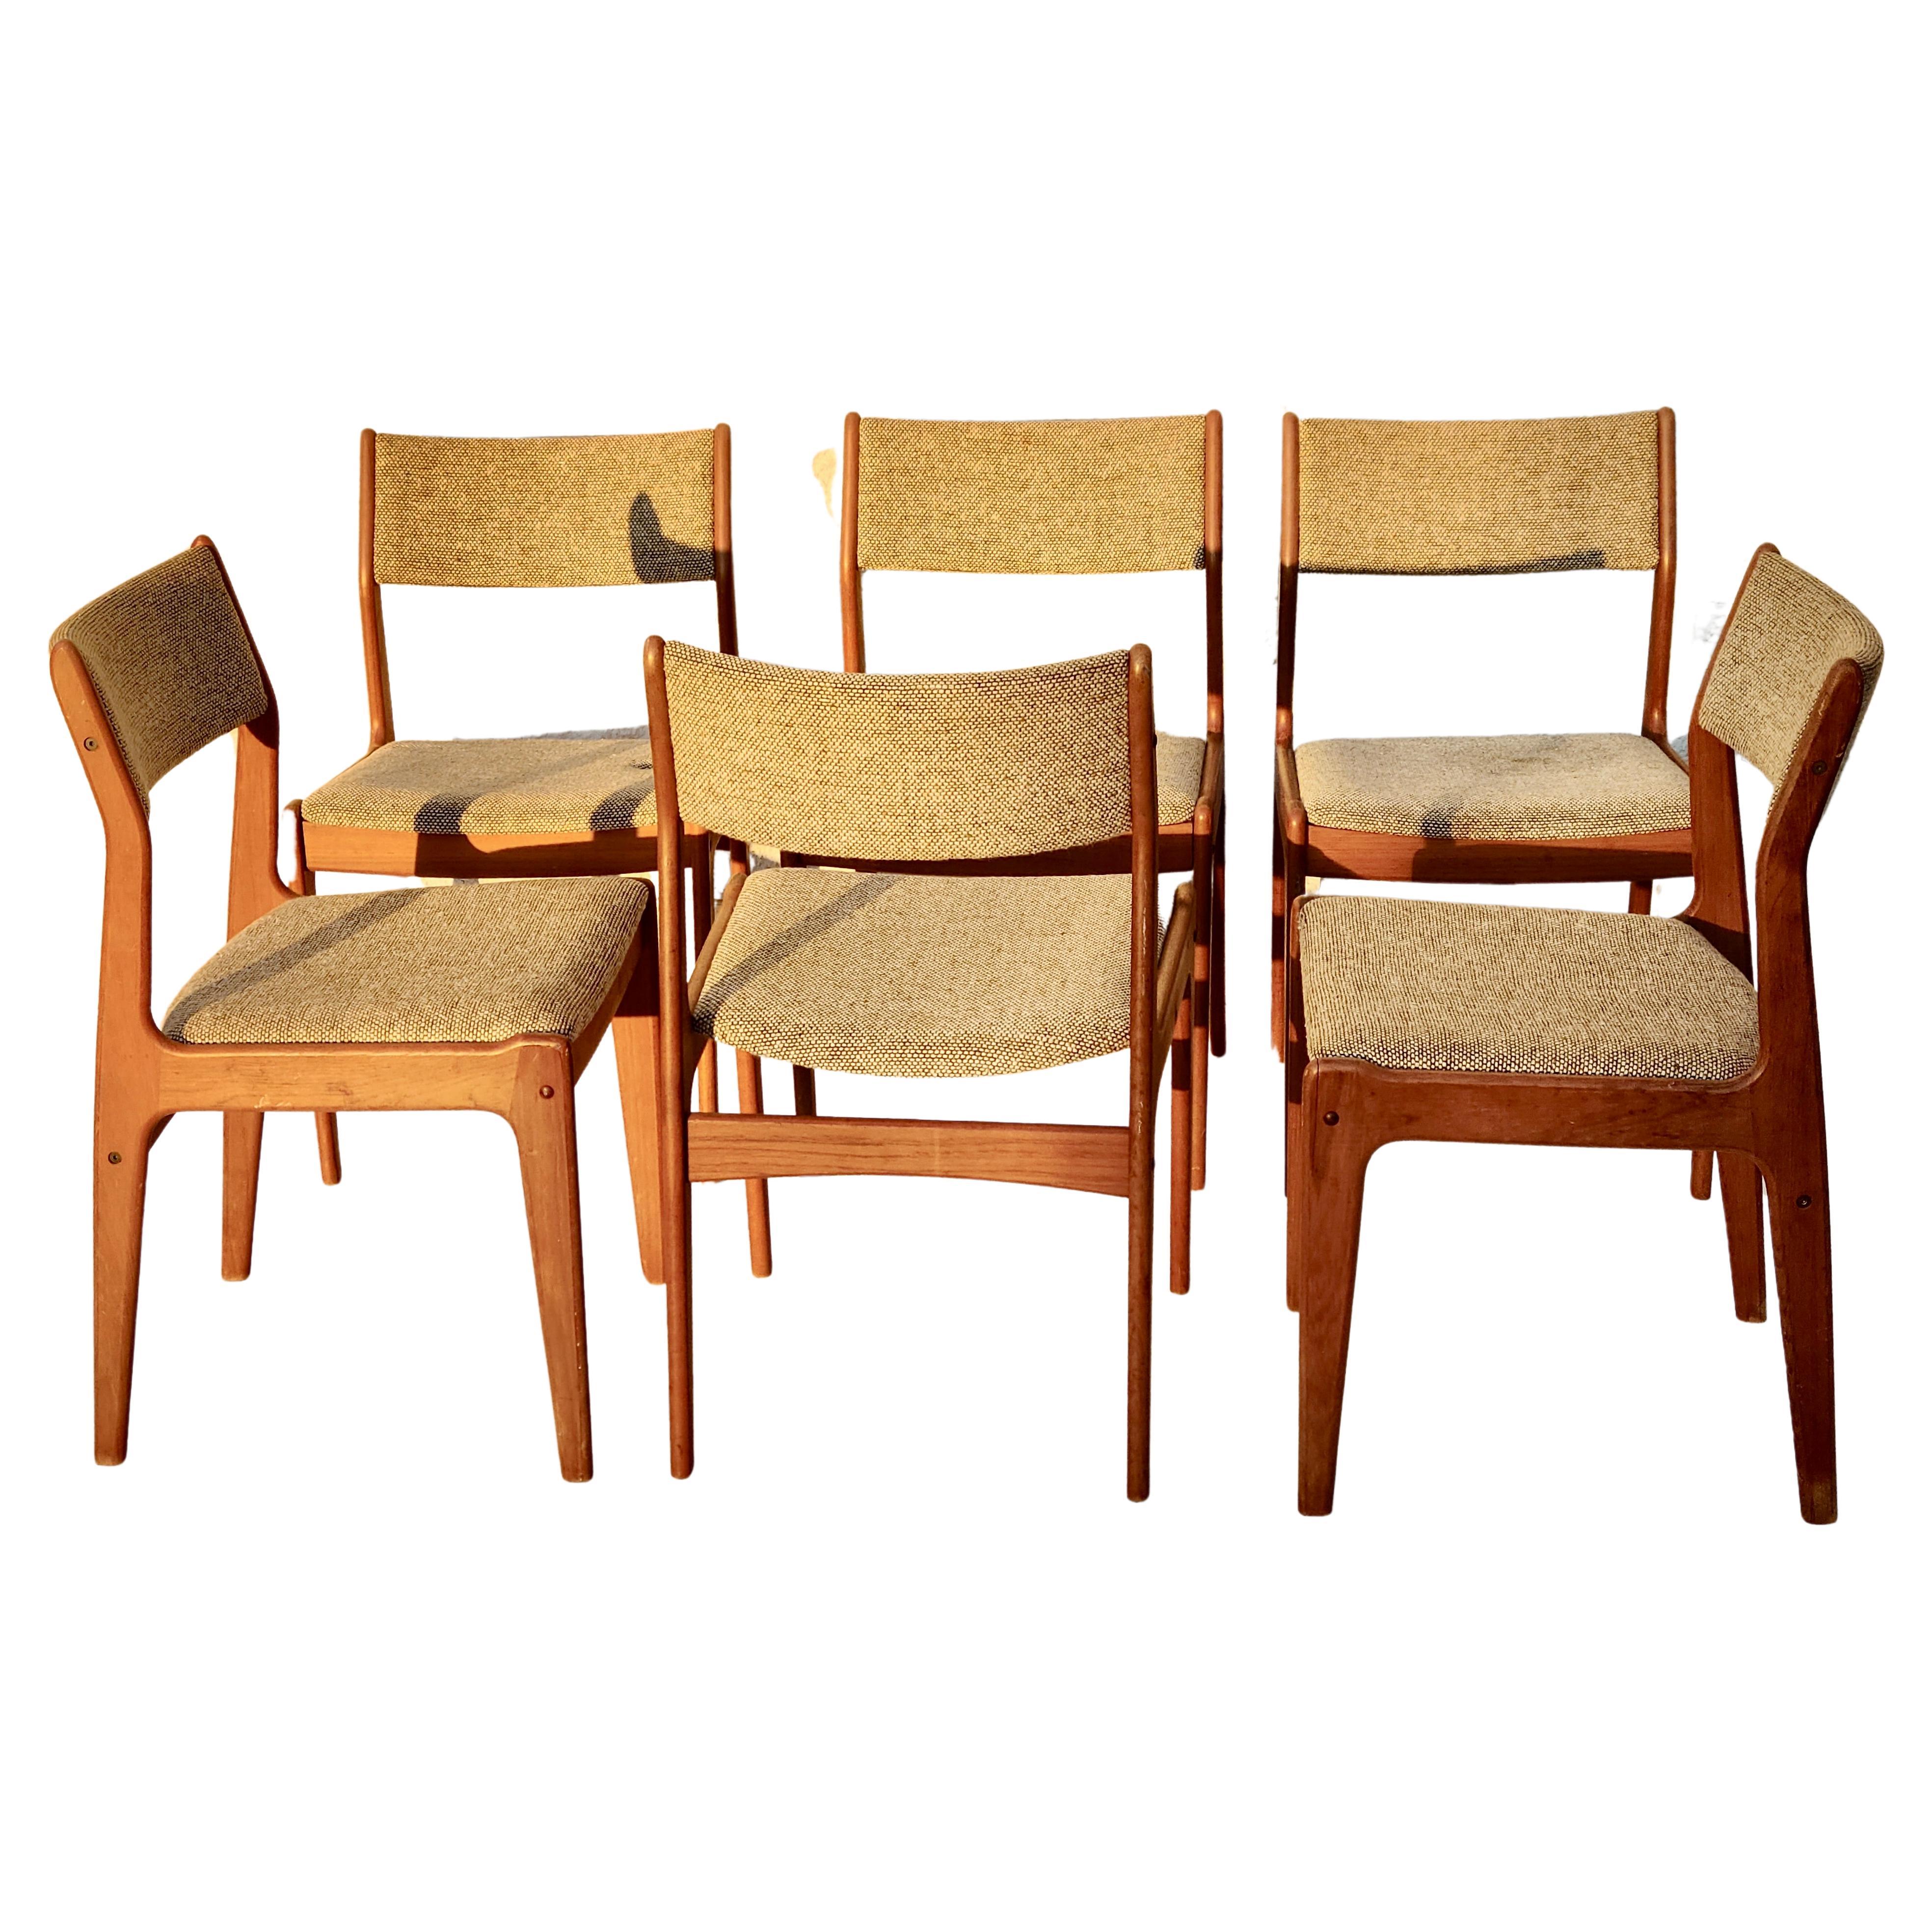 Set of 6 Sculpted Teak Dining chairs in the Style of Benny Linden